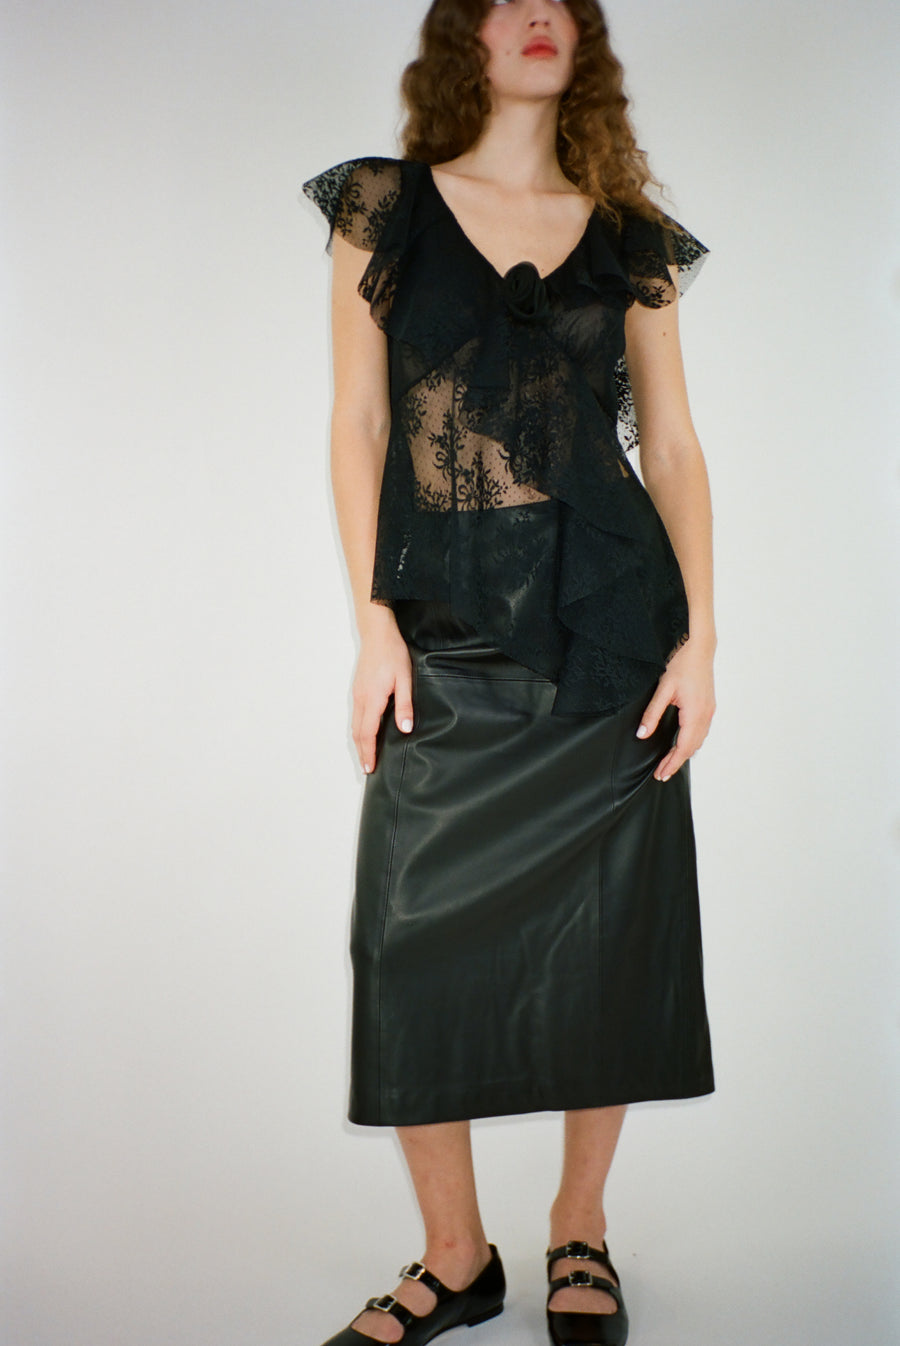 Sleeveless lace top in black with rosette appliques on model